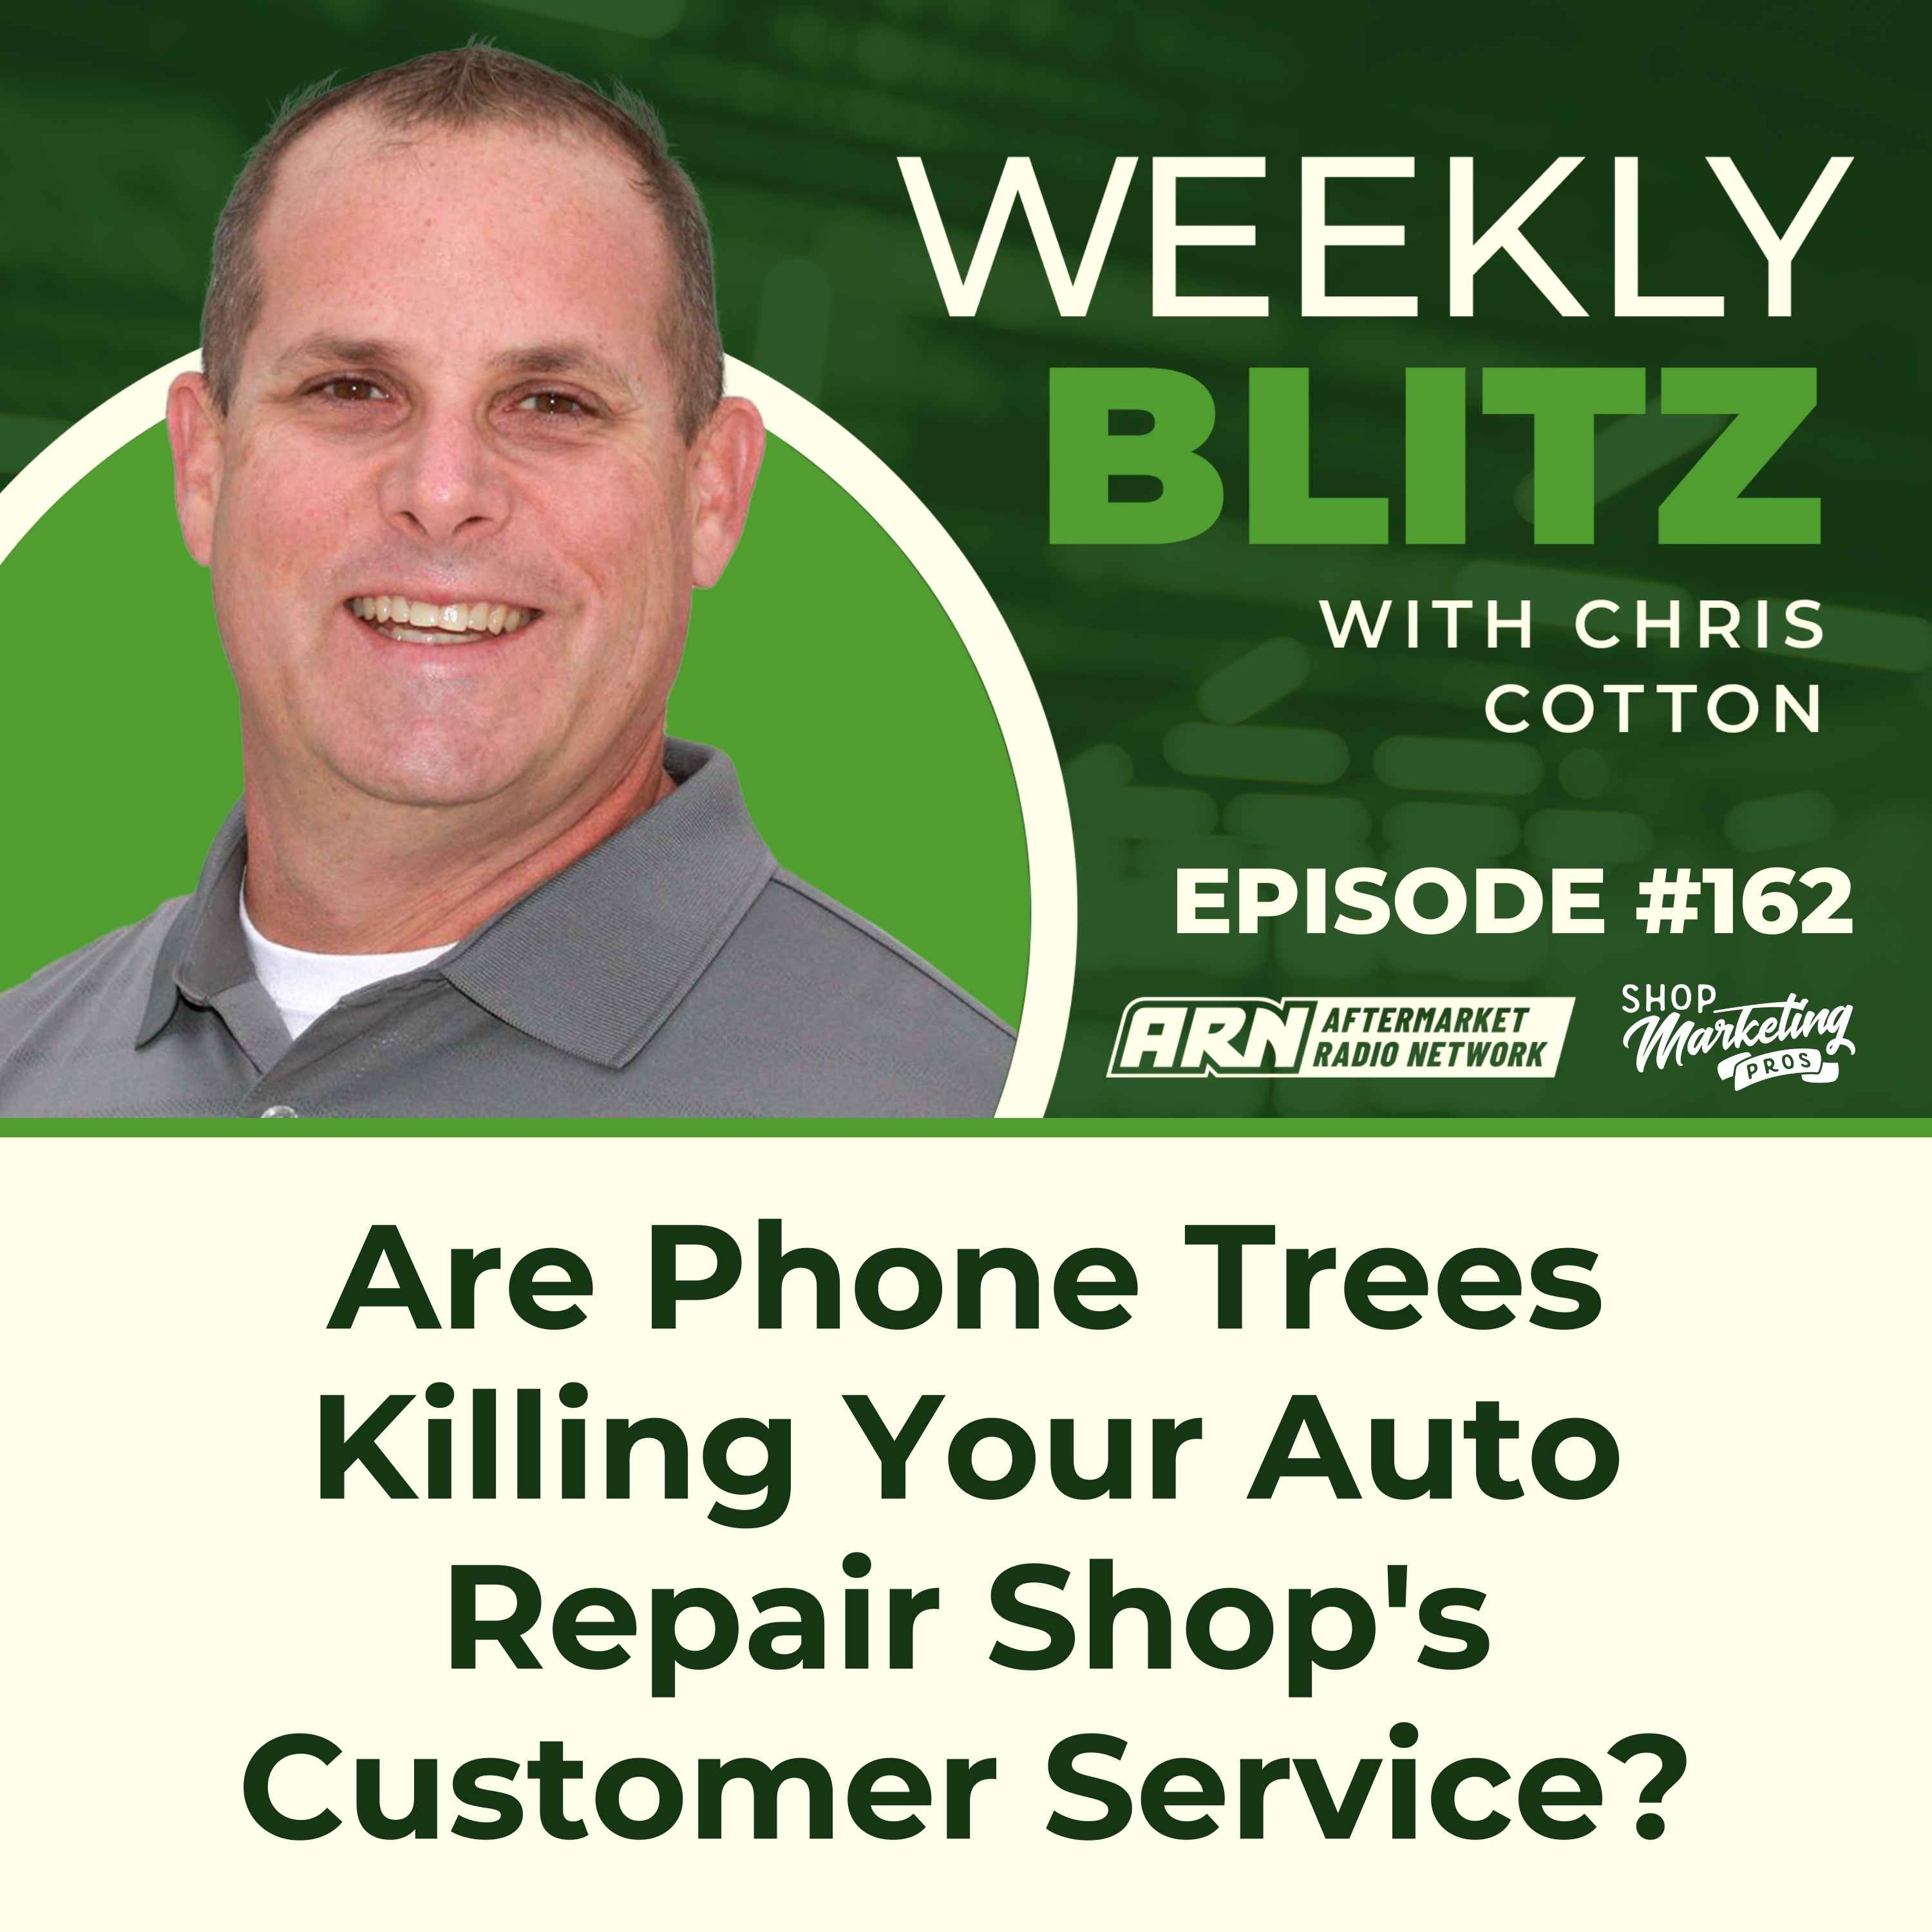 Are Phone Trees Killing Your Auto Repair Shop’s Customer Service? [E162] - Chris Cotton Weekly Blitz